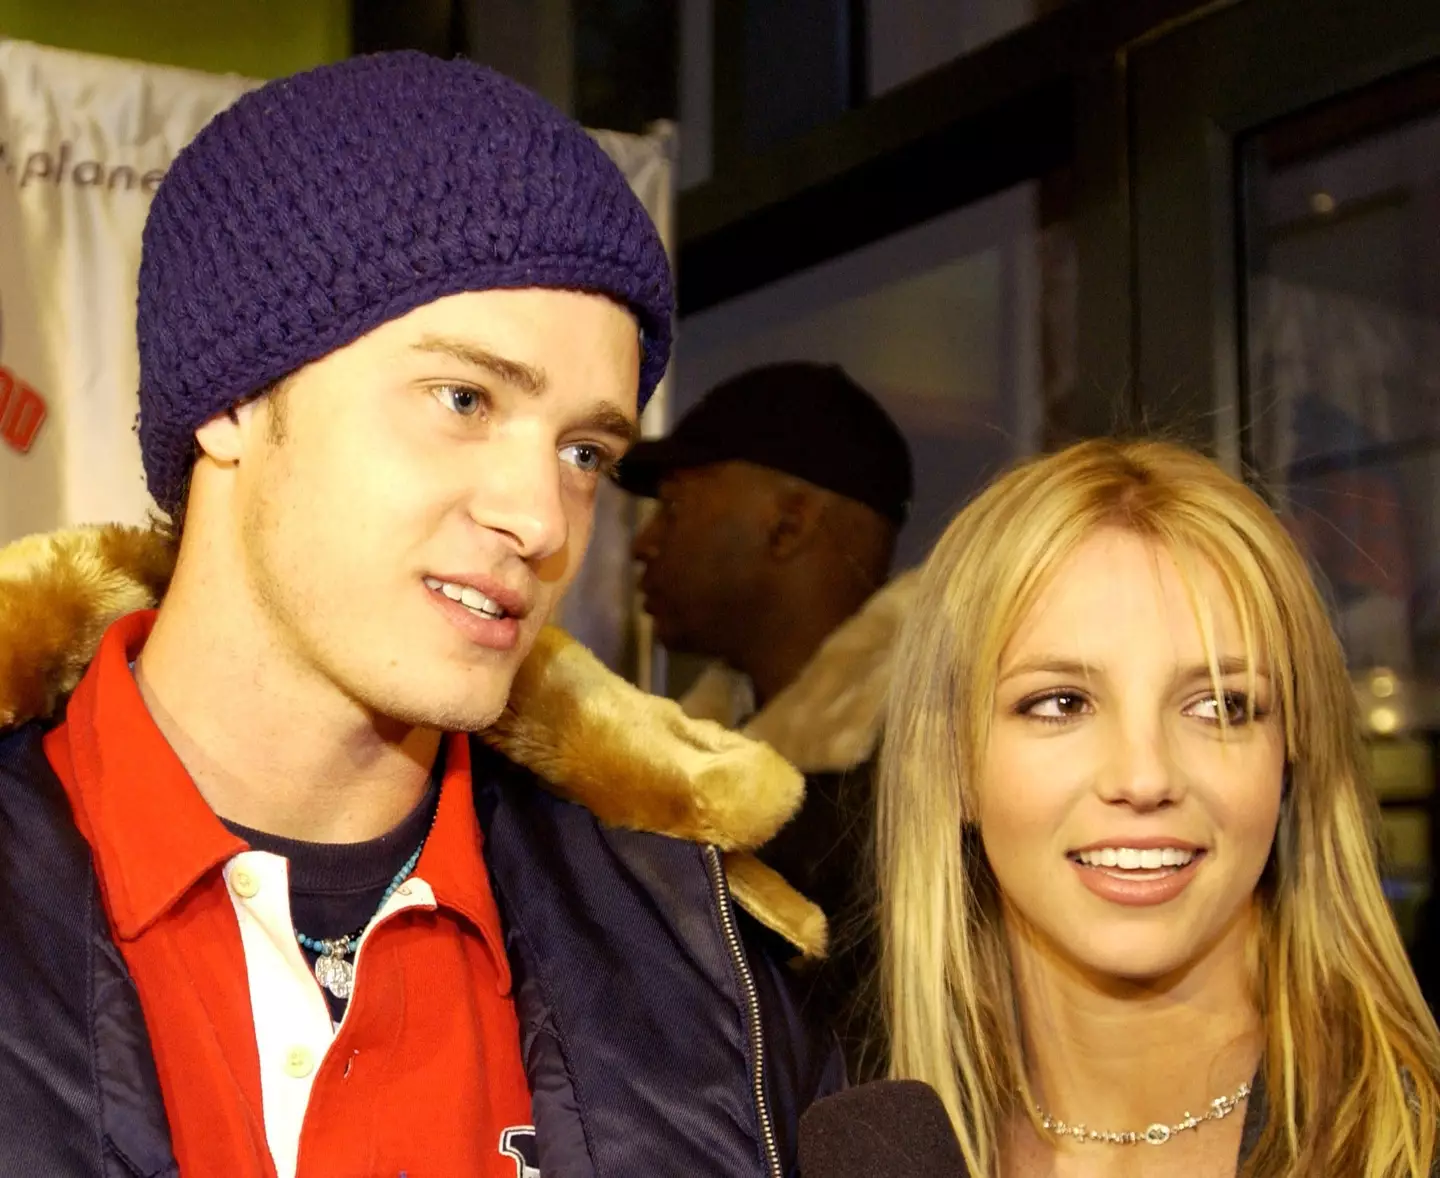 Britney Spears and Justin Timberlake dated in the early 2000s.